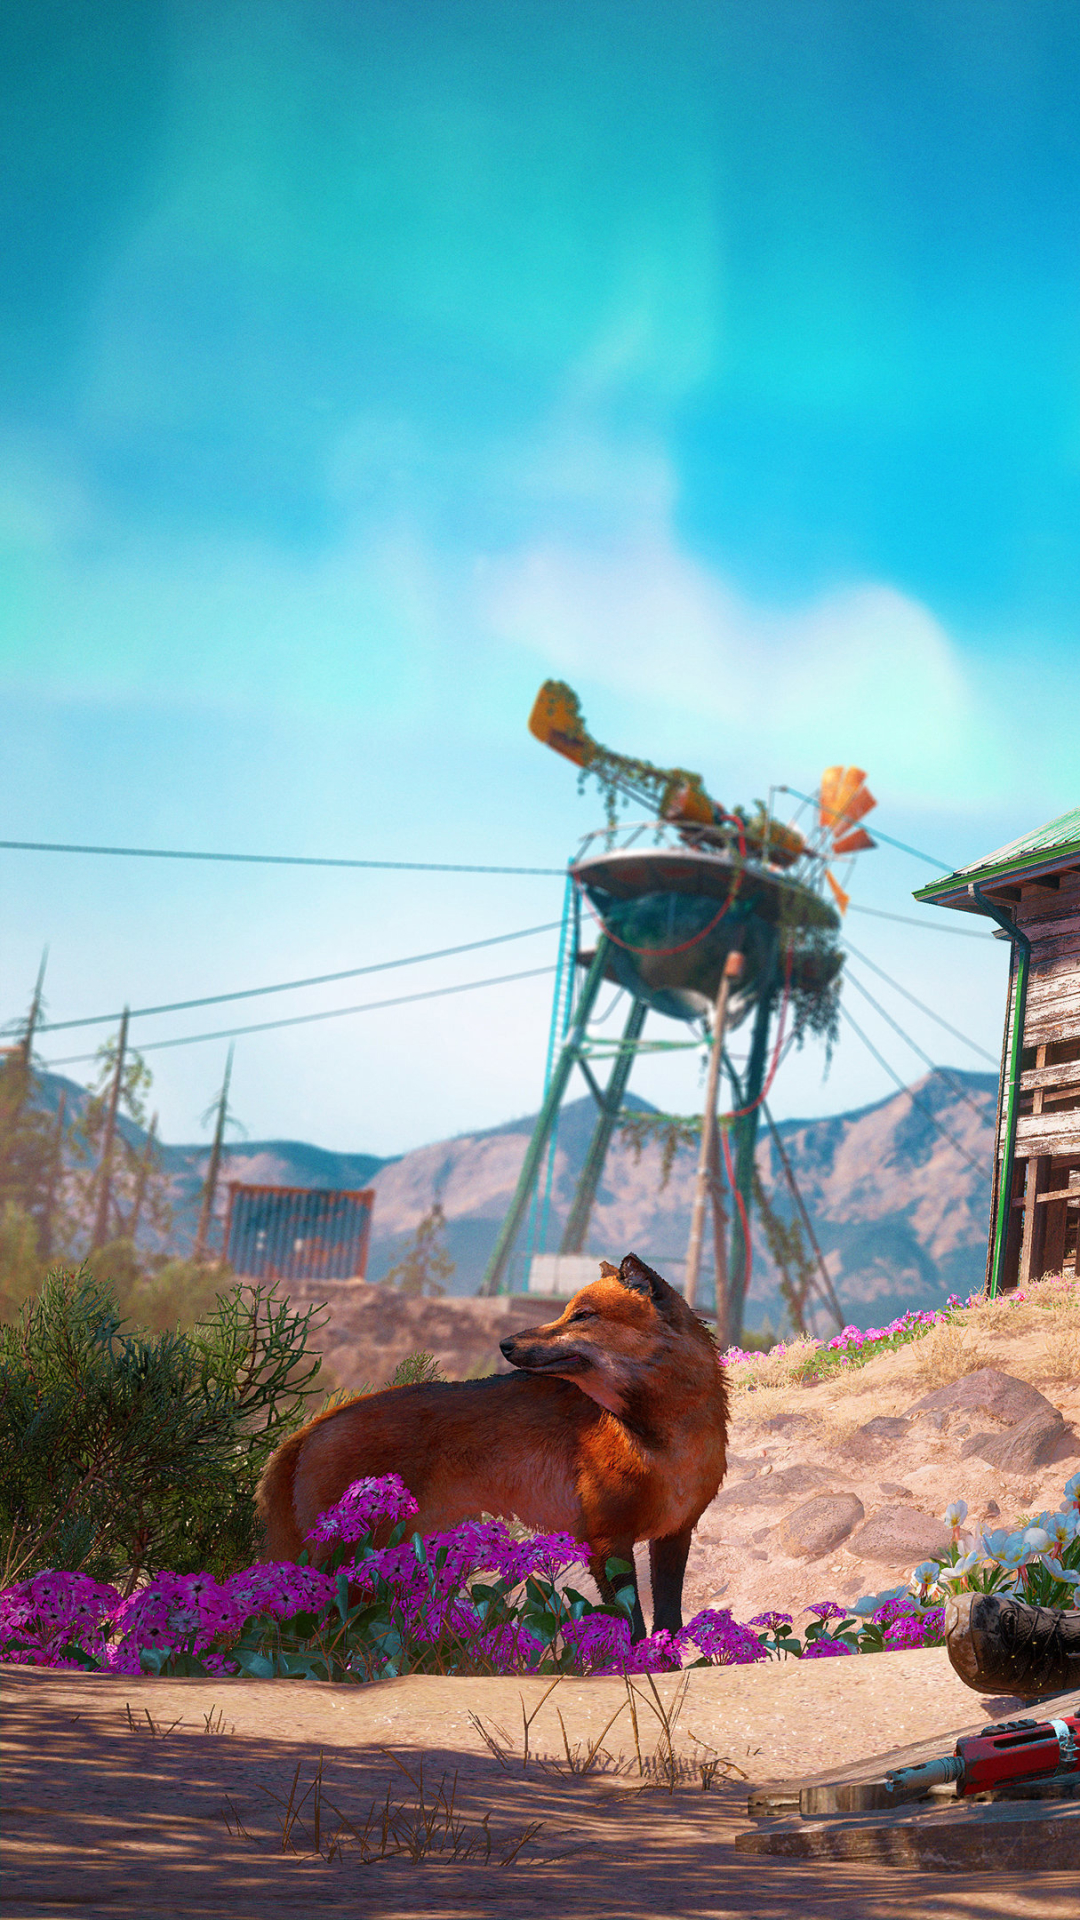 far cry new dawn, video game, far cry lock screen backgrounds